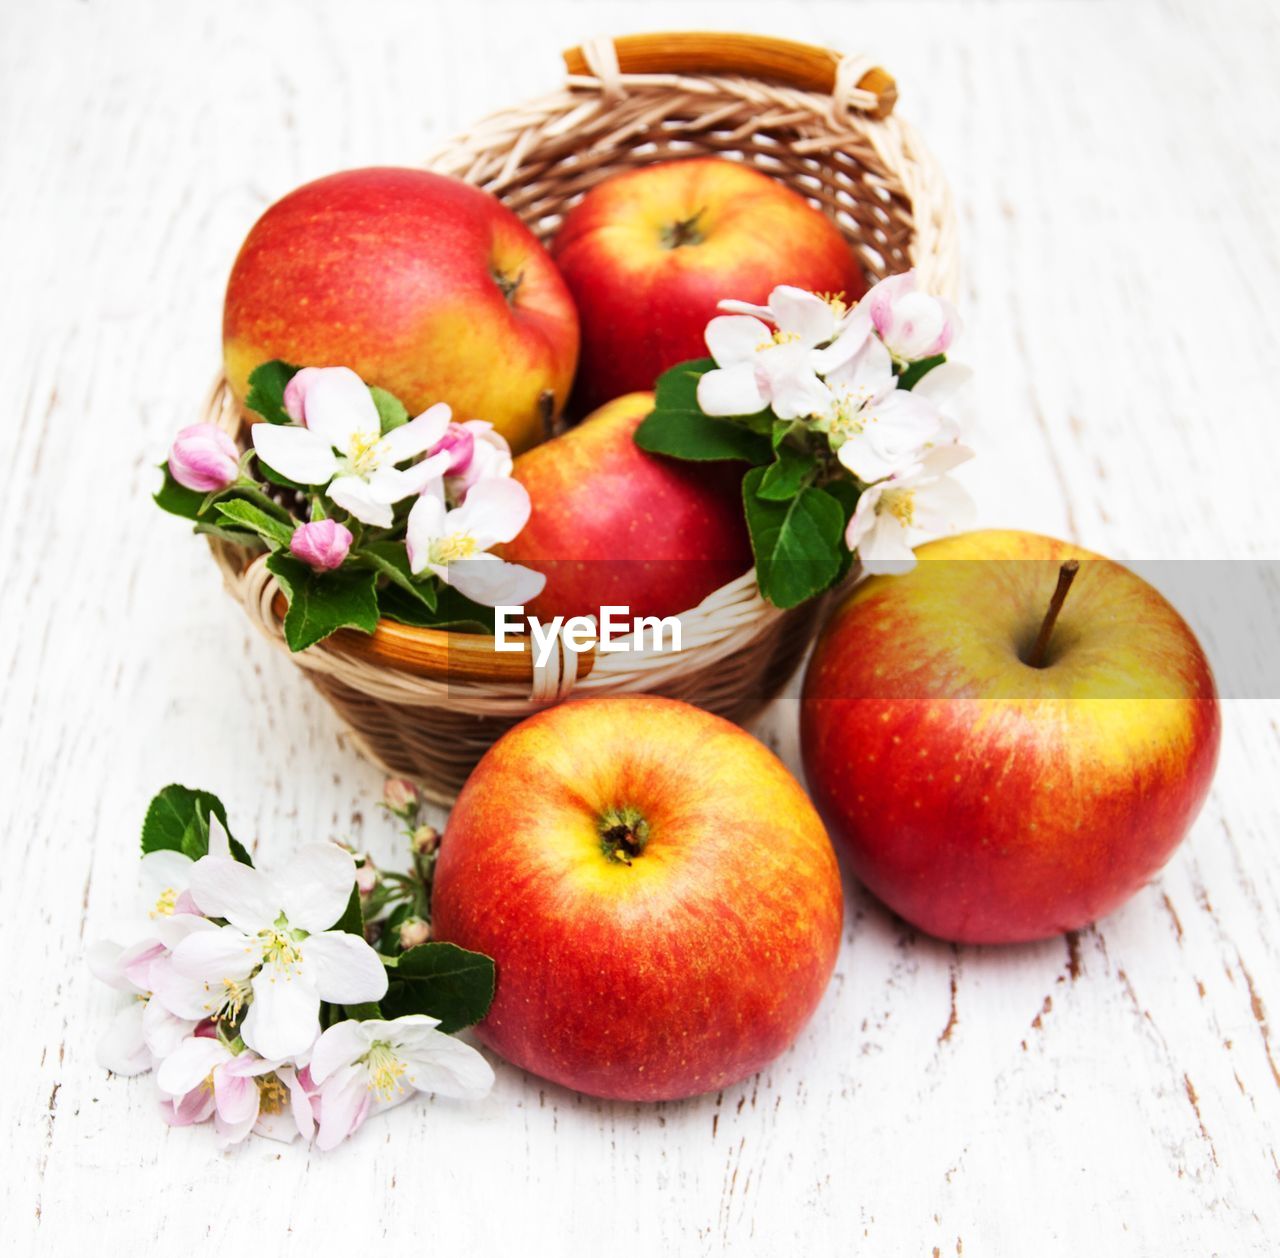 VIEW OF APPLES IN BASKET